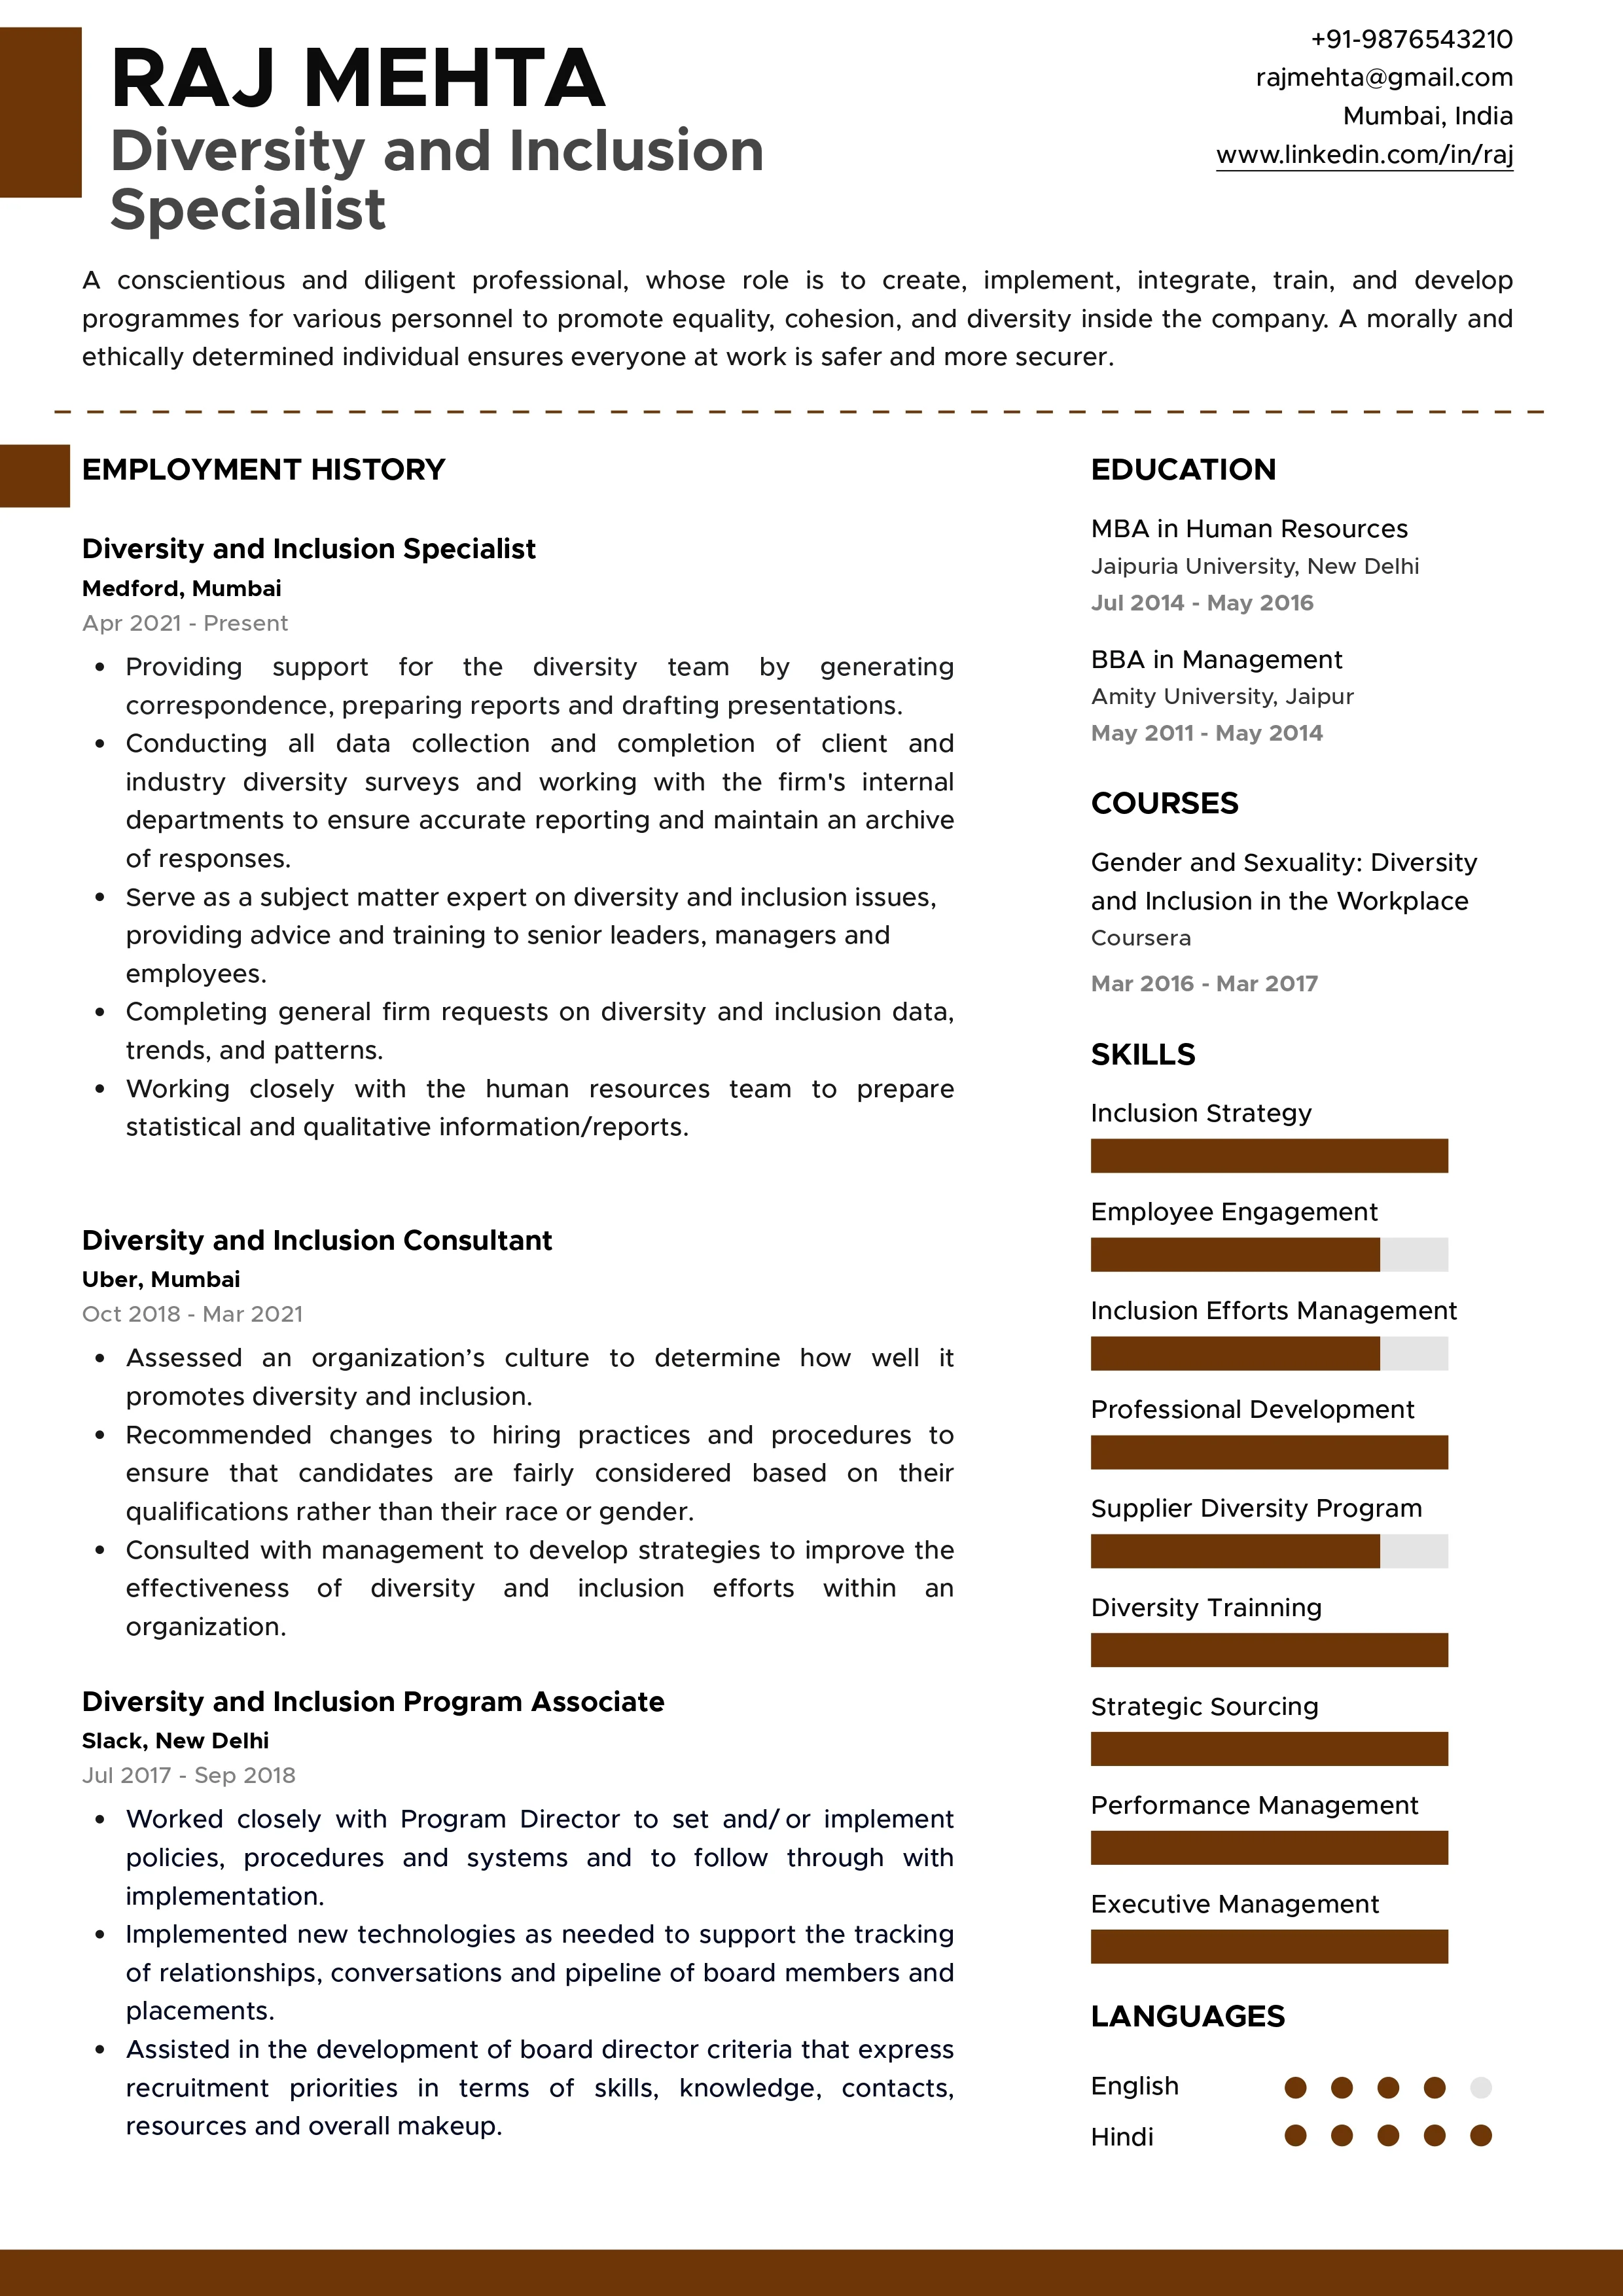 Sample Resume of Diversity and Inclusion Specialist | Free Resume Templates & Samples on Resumod.co